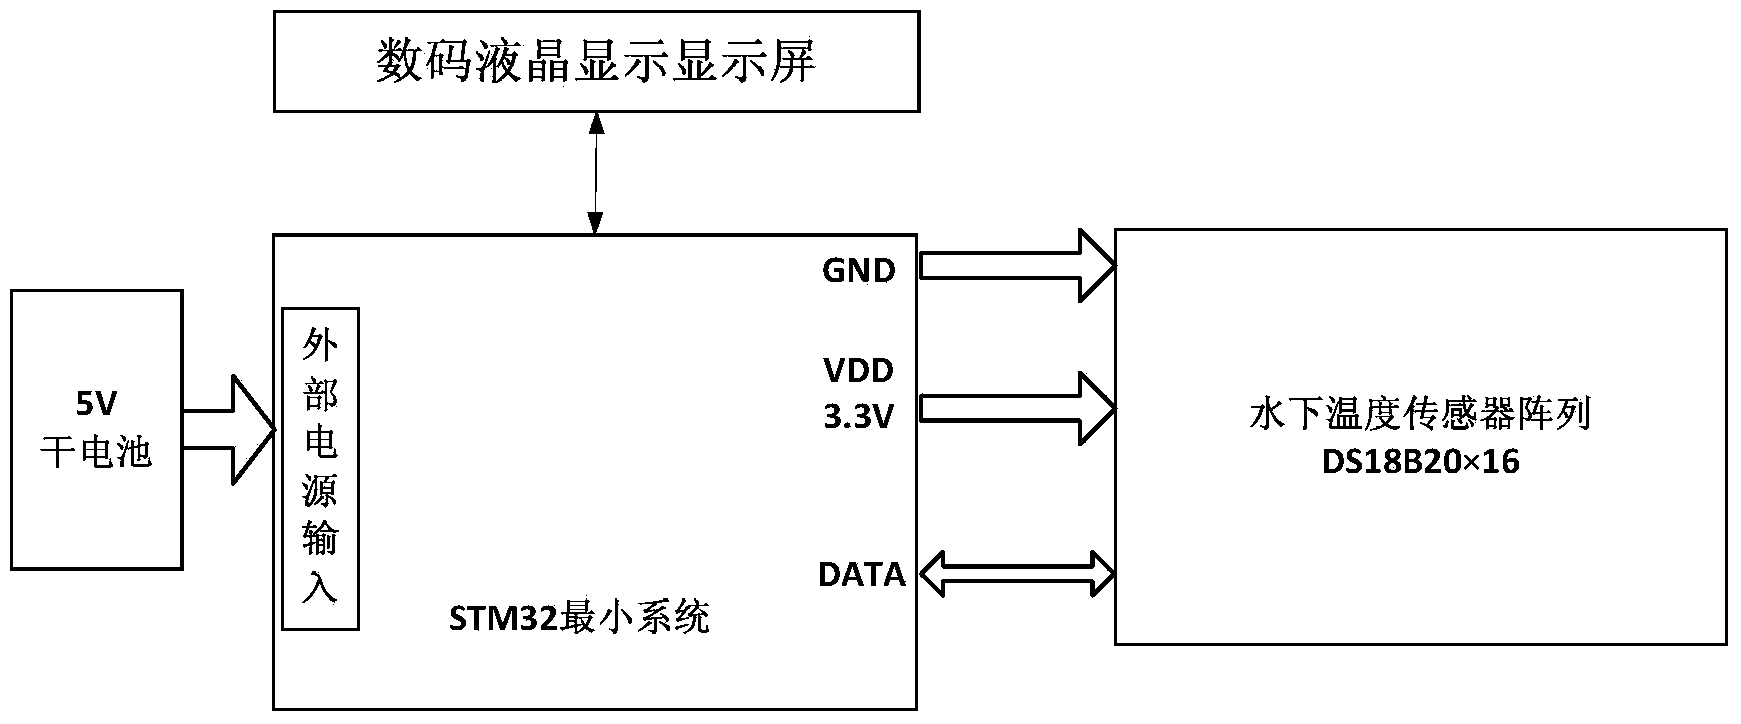 Bottom-water temperature detection system